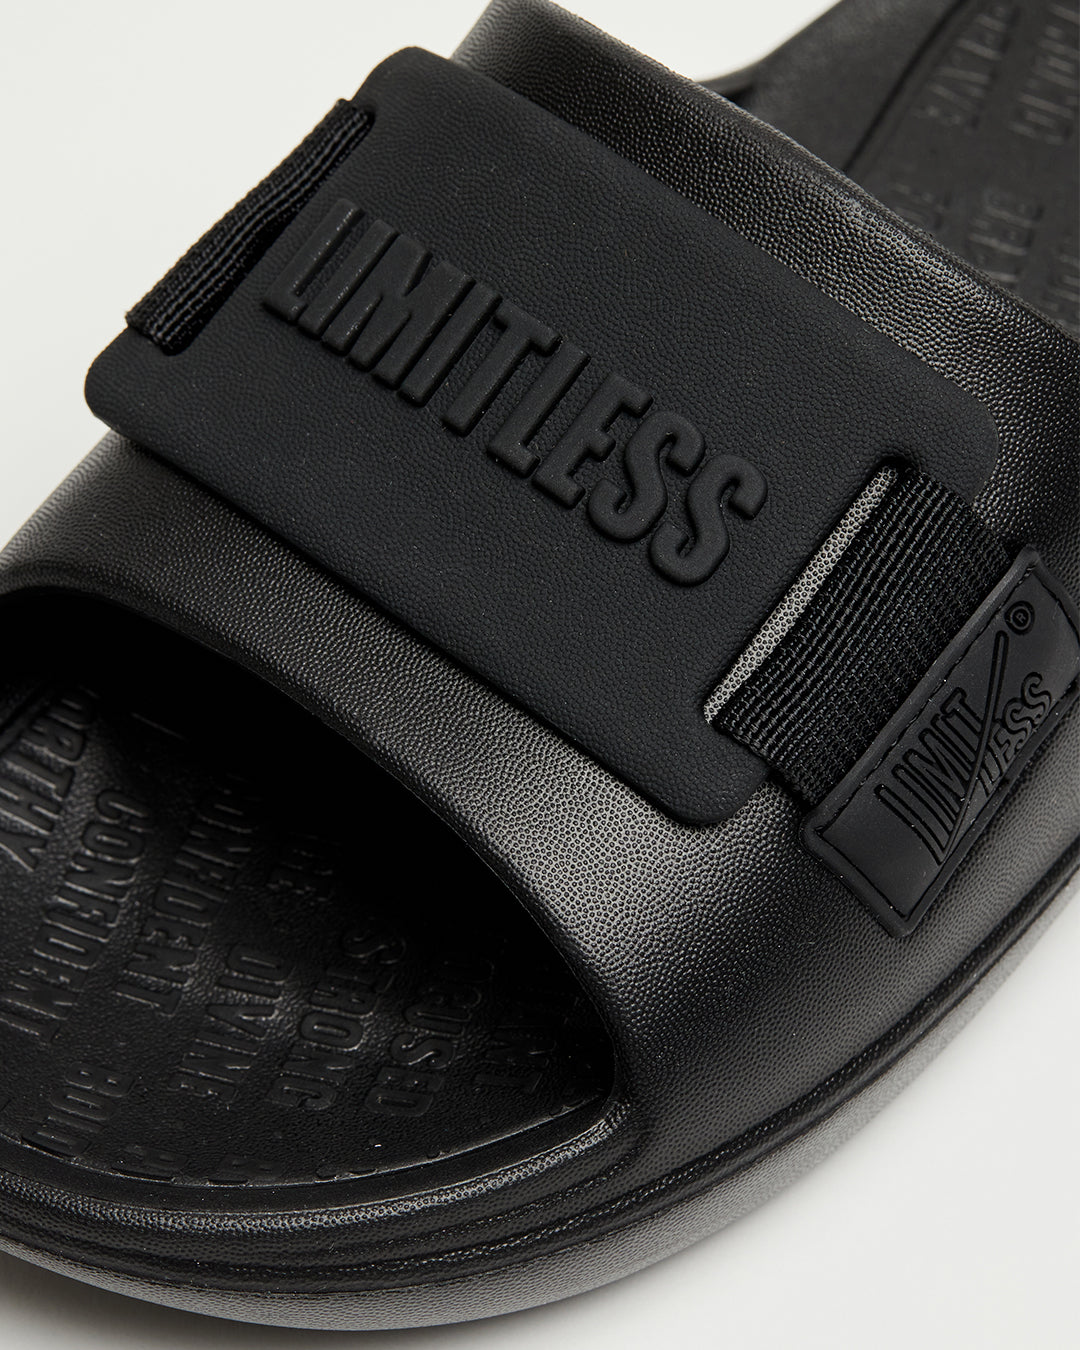 LIMITLESS SLIDES™ WITH ESSENTIAL TIBAH™ QUAD - ANDREW HIGH SCHOOL EDITION